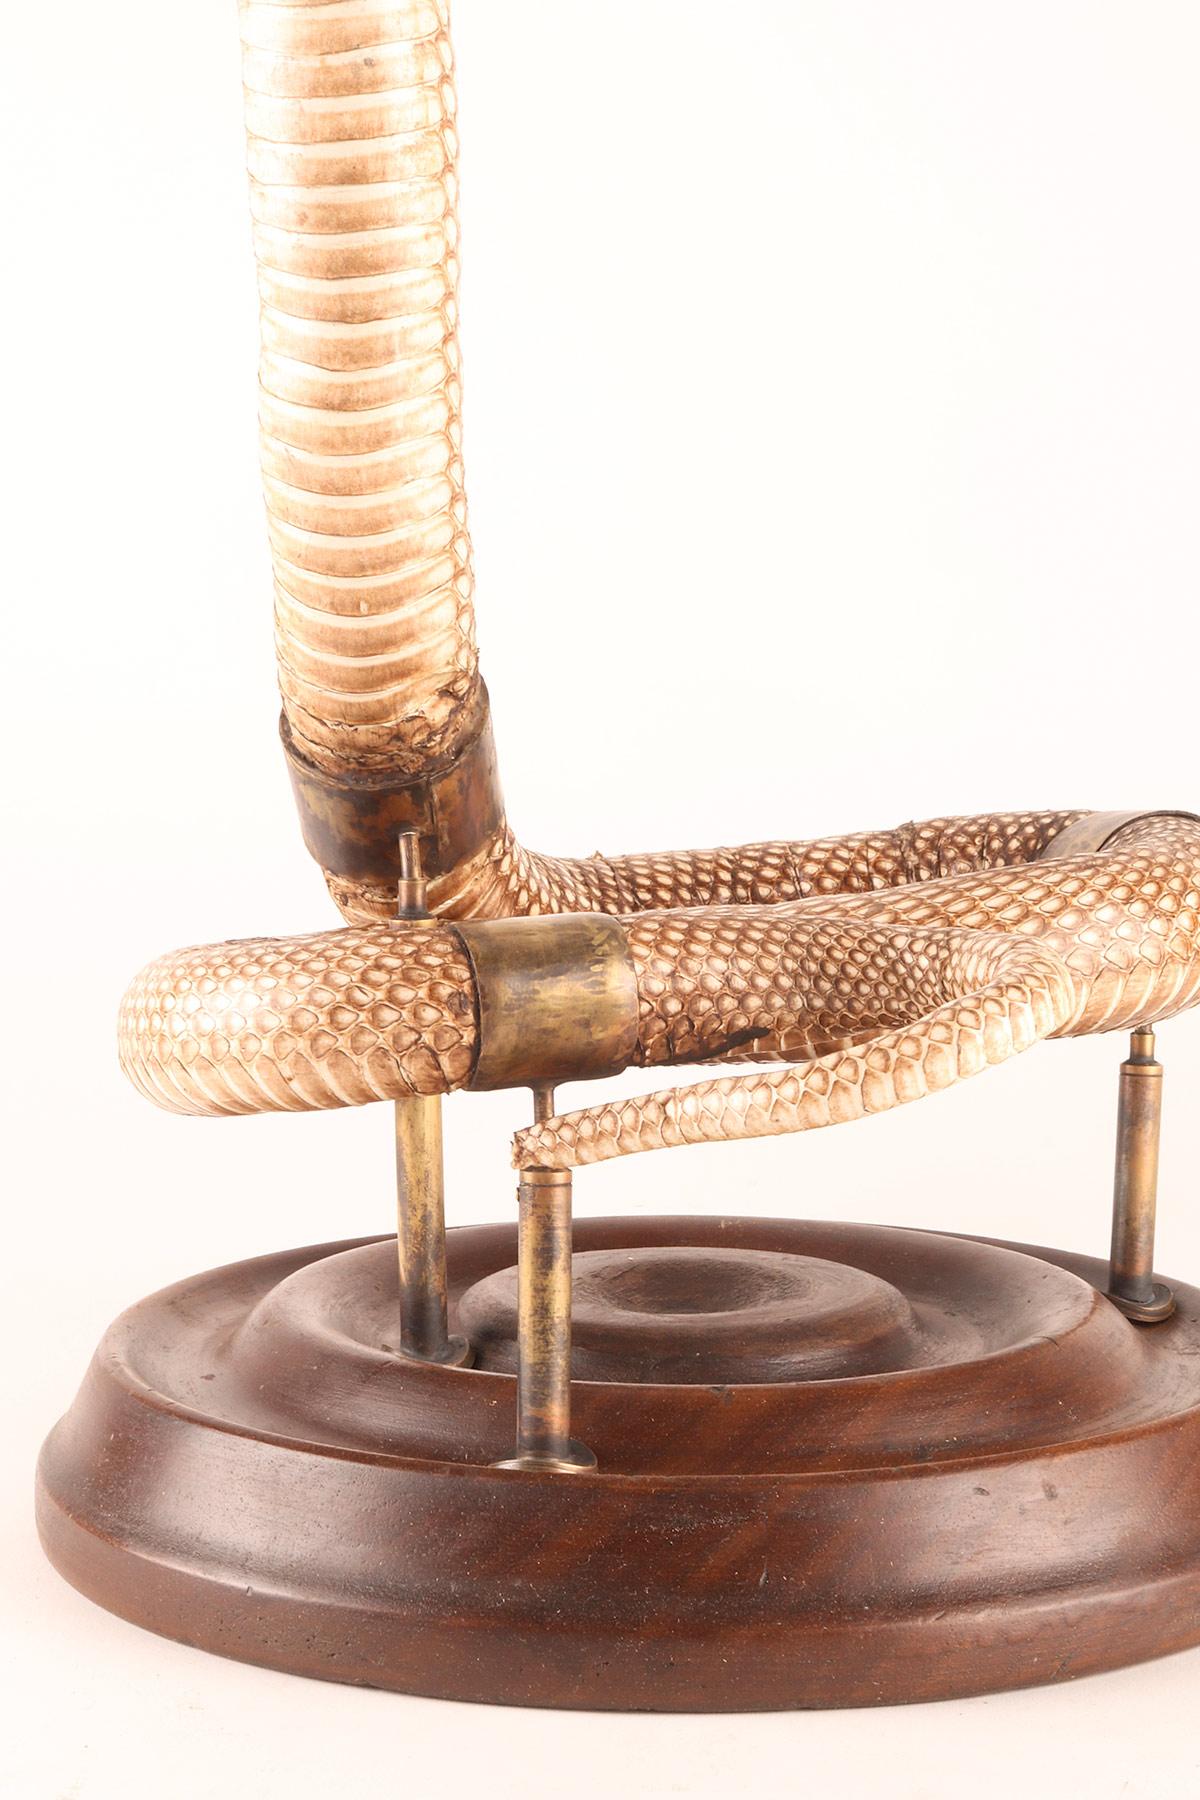 19th Century A specimen of Hemachatus hemachatus snake taxidermy, Italy 1890. For Sale